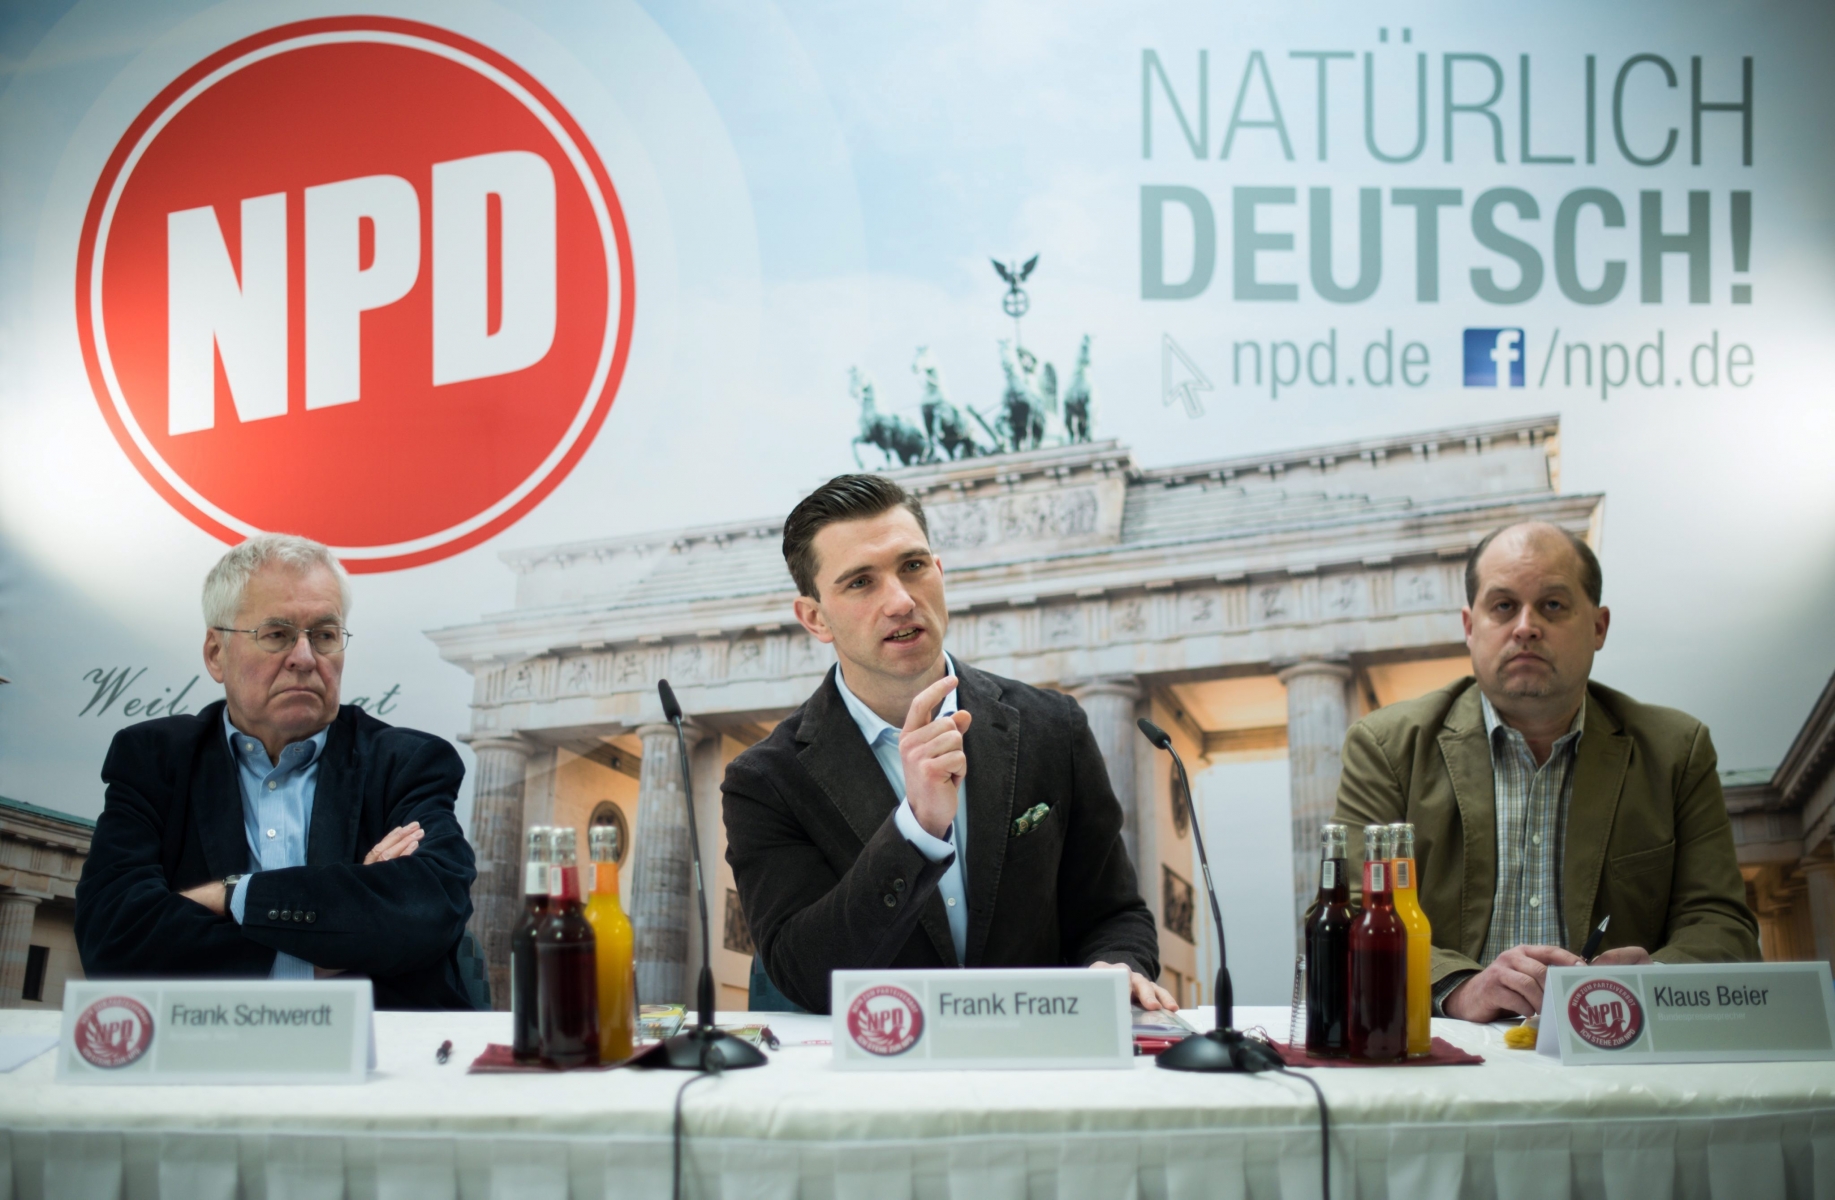 epa05199273 (L-R) Frank Schwerdt, deputy federal chairman of the German right-wing extremist National Democratic Party (NPD), Frank Franz, NPD federal chairman, and Klaus Beier, federal whip, speak at a press conference on the proceedings in the NPD ban and the coming parliamentary elections in thye party's headquarters in Berlin, Germany, 07 March 2016. Slogan in background reads: 'Naturally German!'. An effort by  the NPD on 02 March to have a ban request against it thrown out on the basis that state informants are active in its ranks has failed at the Constitutional Court, which is hearing a landmark request from Germany's 16 federal states to ban the ultranationalist party. A previous attempt to ban the party failed in 2003 because the presence of undercover informants from the domestic intelligence agency in its upper echelons was seen as weakening the evidence.  EPA/BERND VON JUTRCZENKA . GERMANY POLITICS PARTIES NATIONALISTS